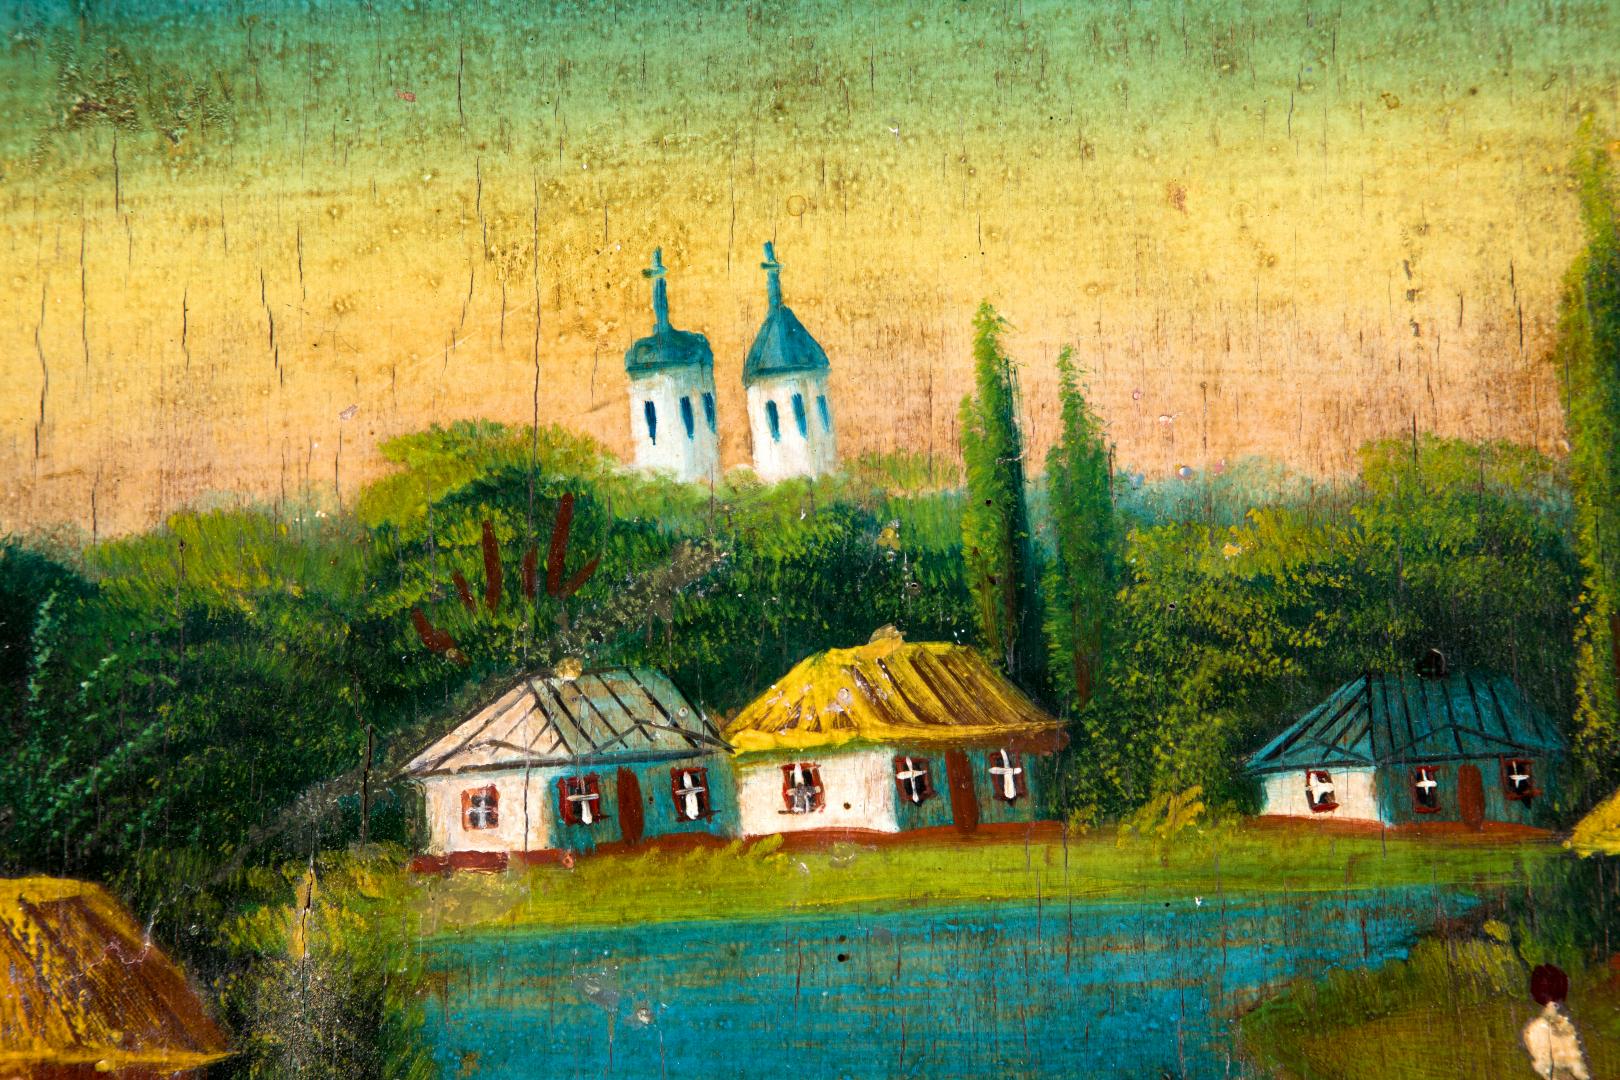 Rural landscape with a church and swans